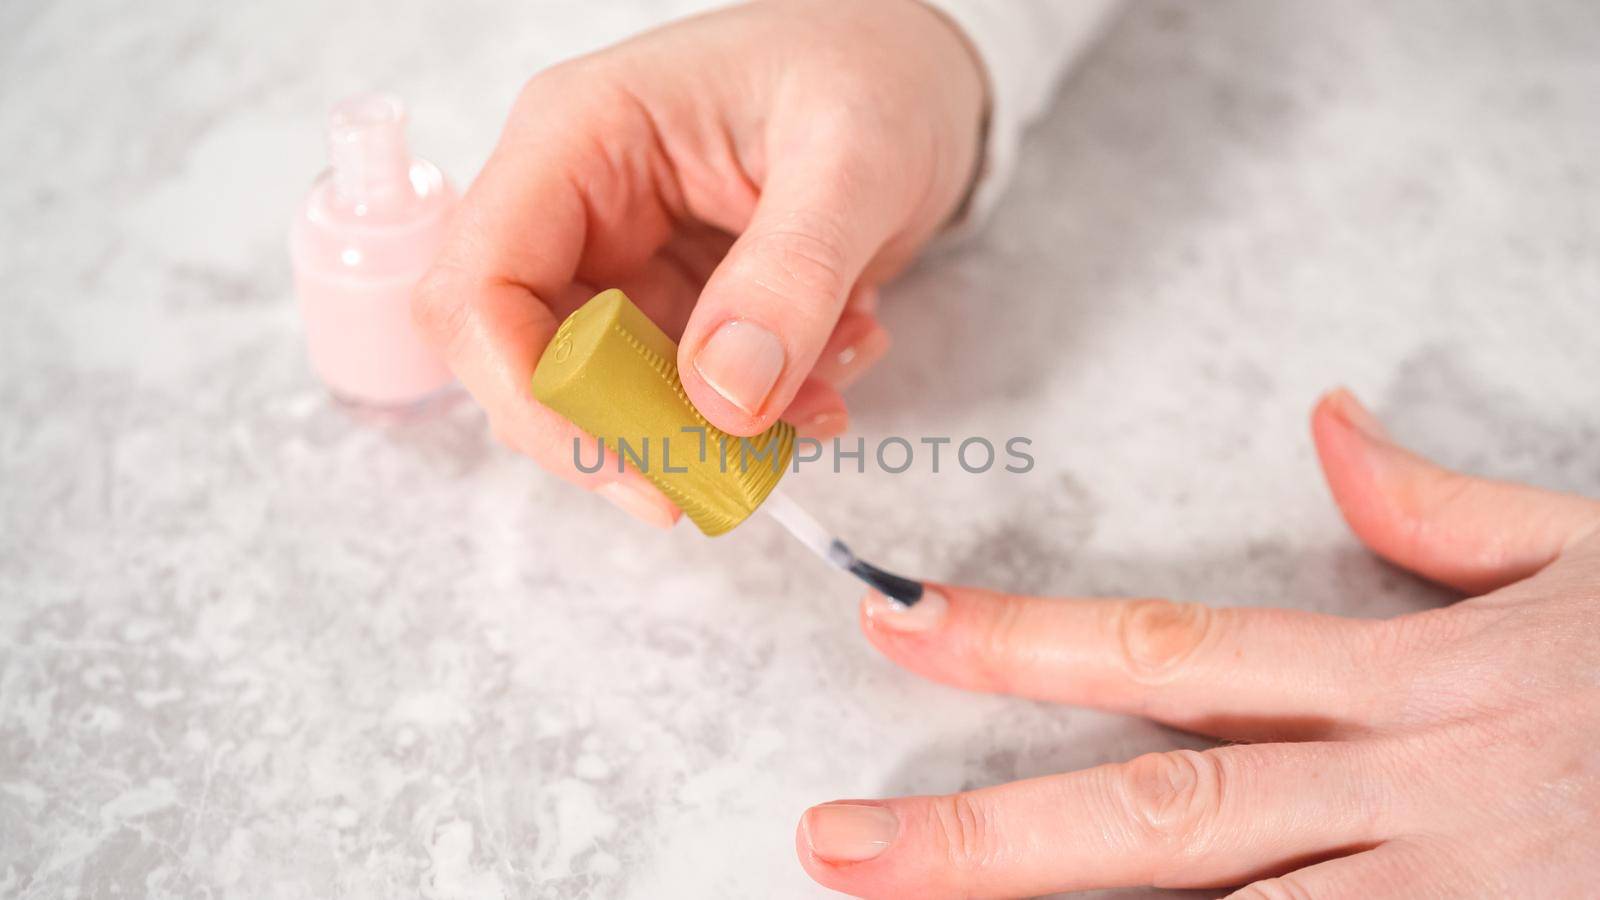 Woman finishing her manicure at home with simple manicure tools. Painting nails with fresh nail polish.